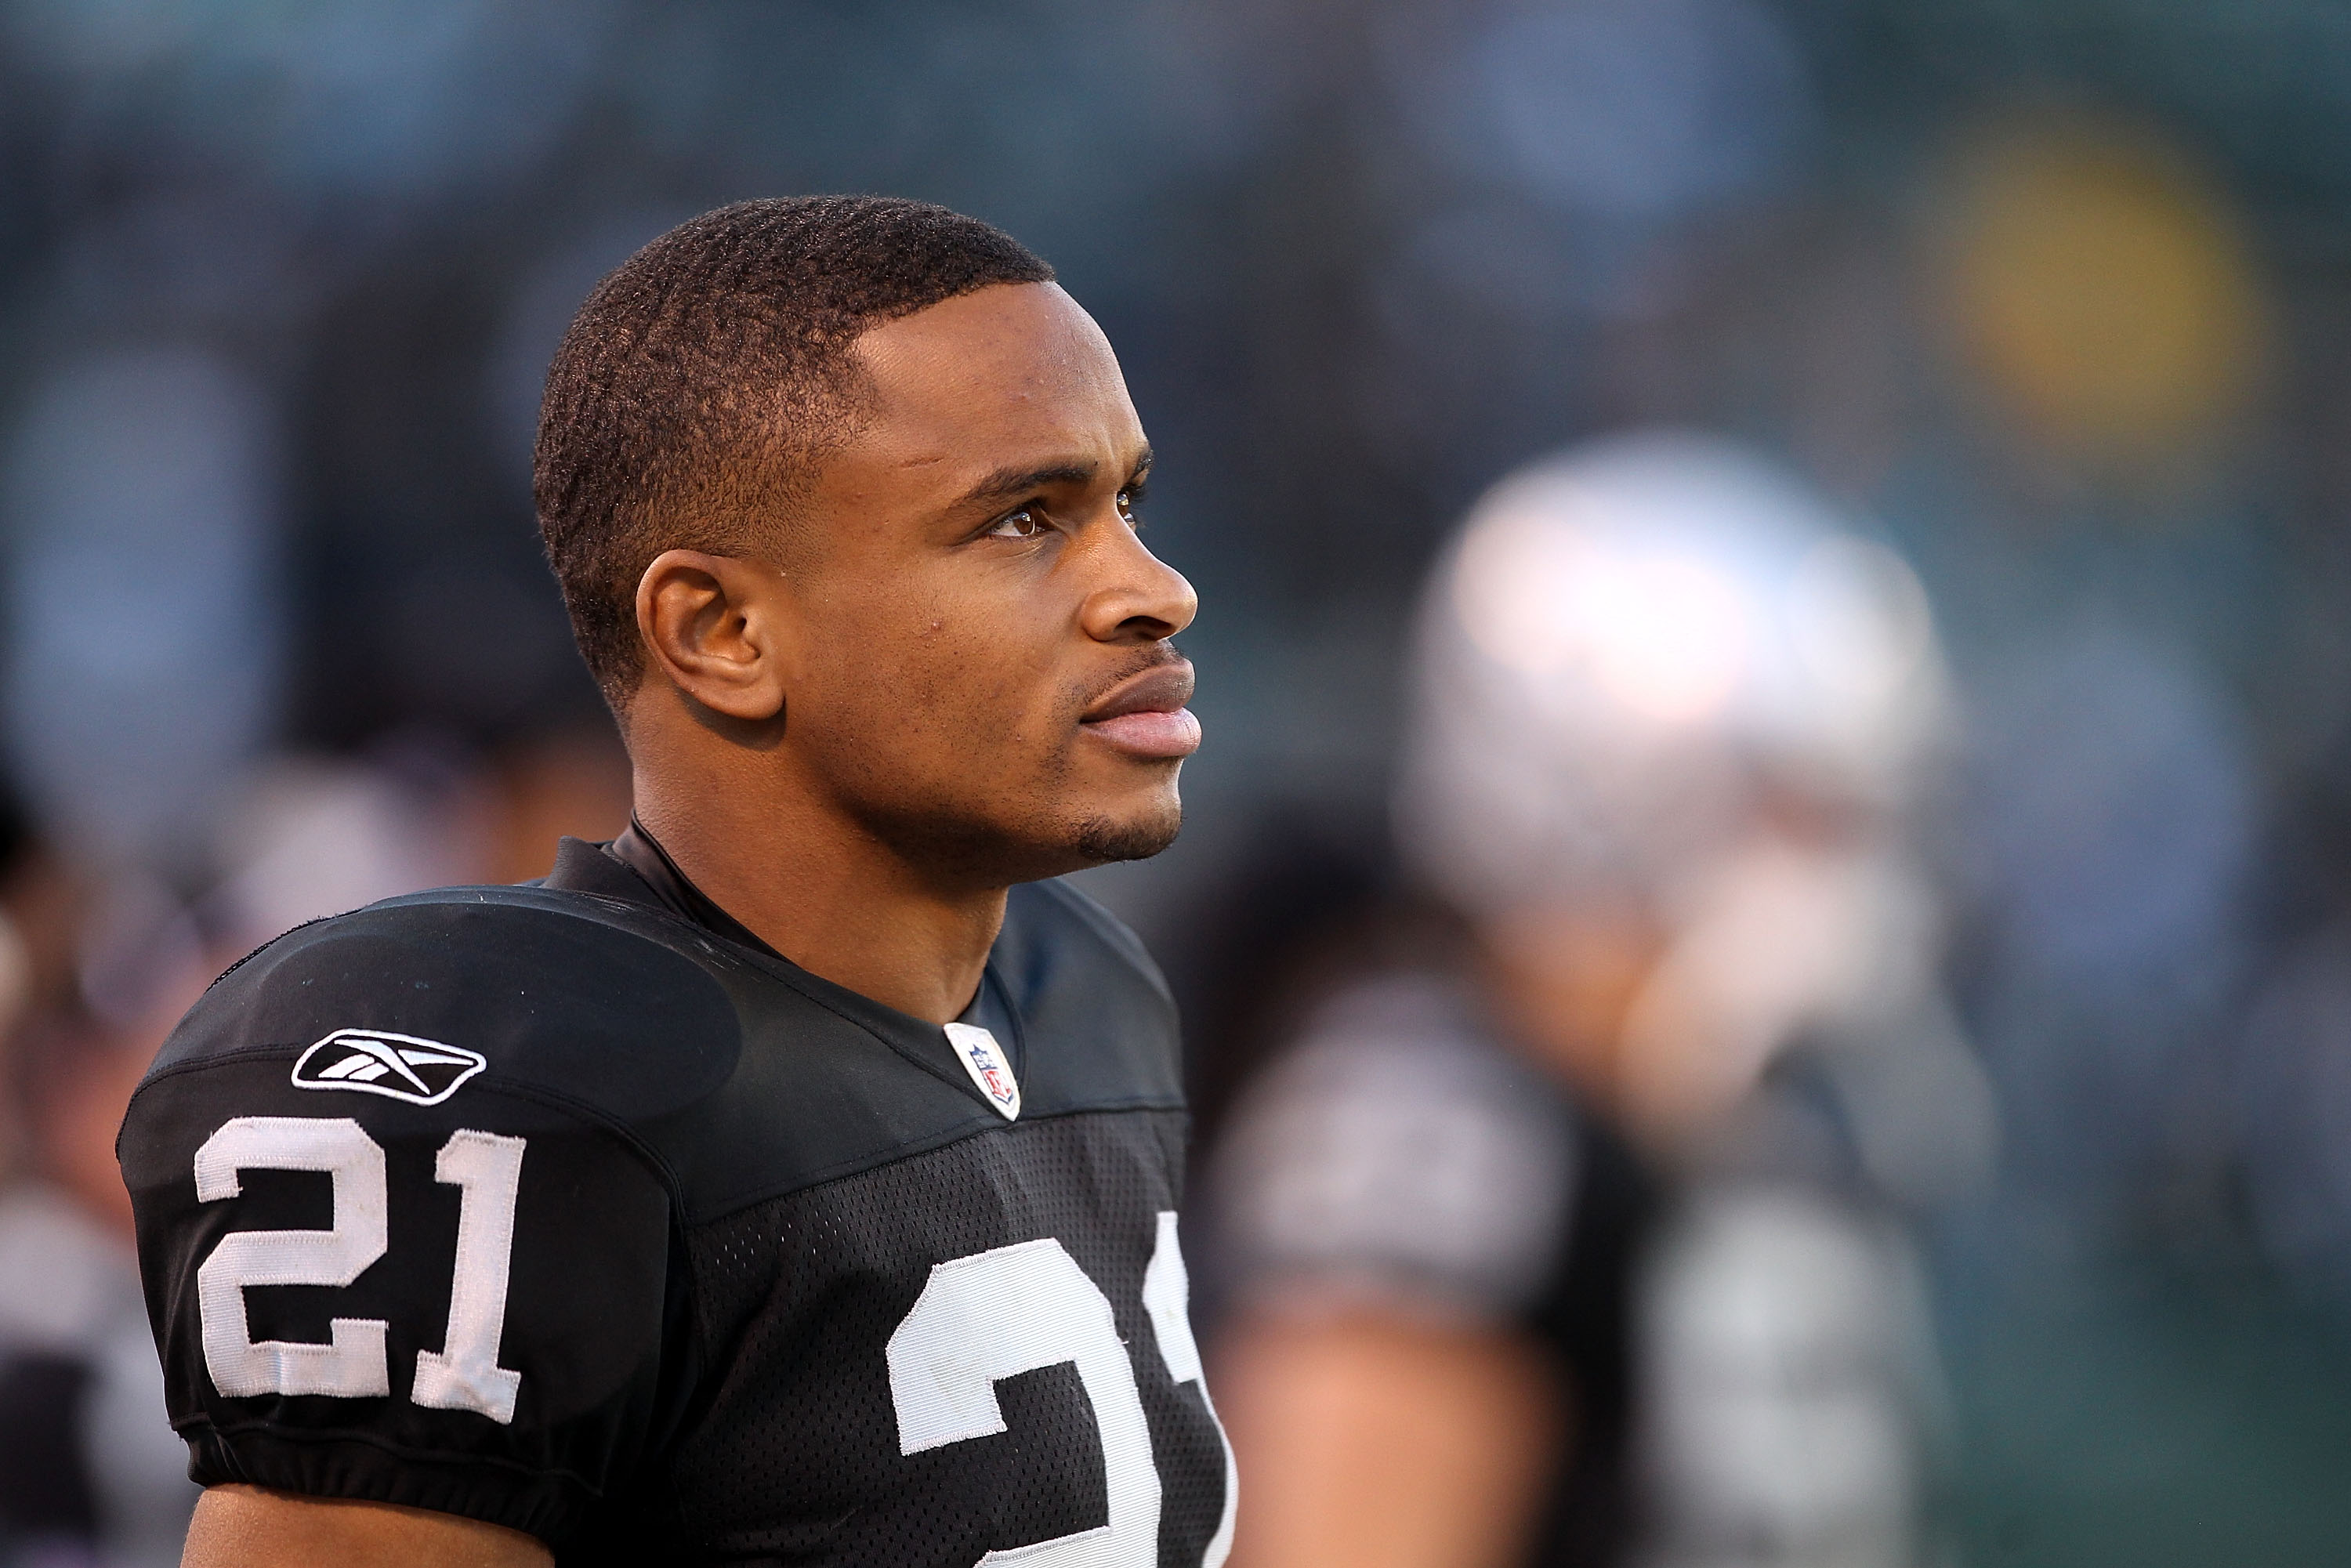 OAKLAND, CA - NOVEMBER 28:  Nnamdi Asomugha #21 of the Oakland Raiders stands on the sidelines during the closing minutes of their loss to the Miami Dolphins at Oakland-Alameda County Coliseum on November 28, 2010 in Oakland, California.  (Photo by Ezra S